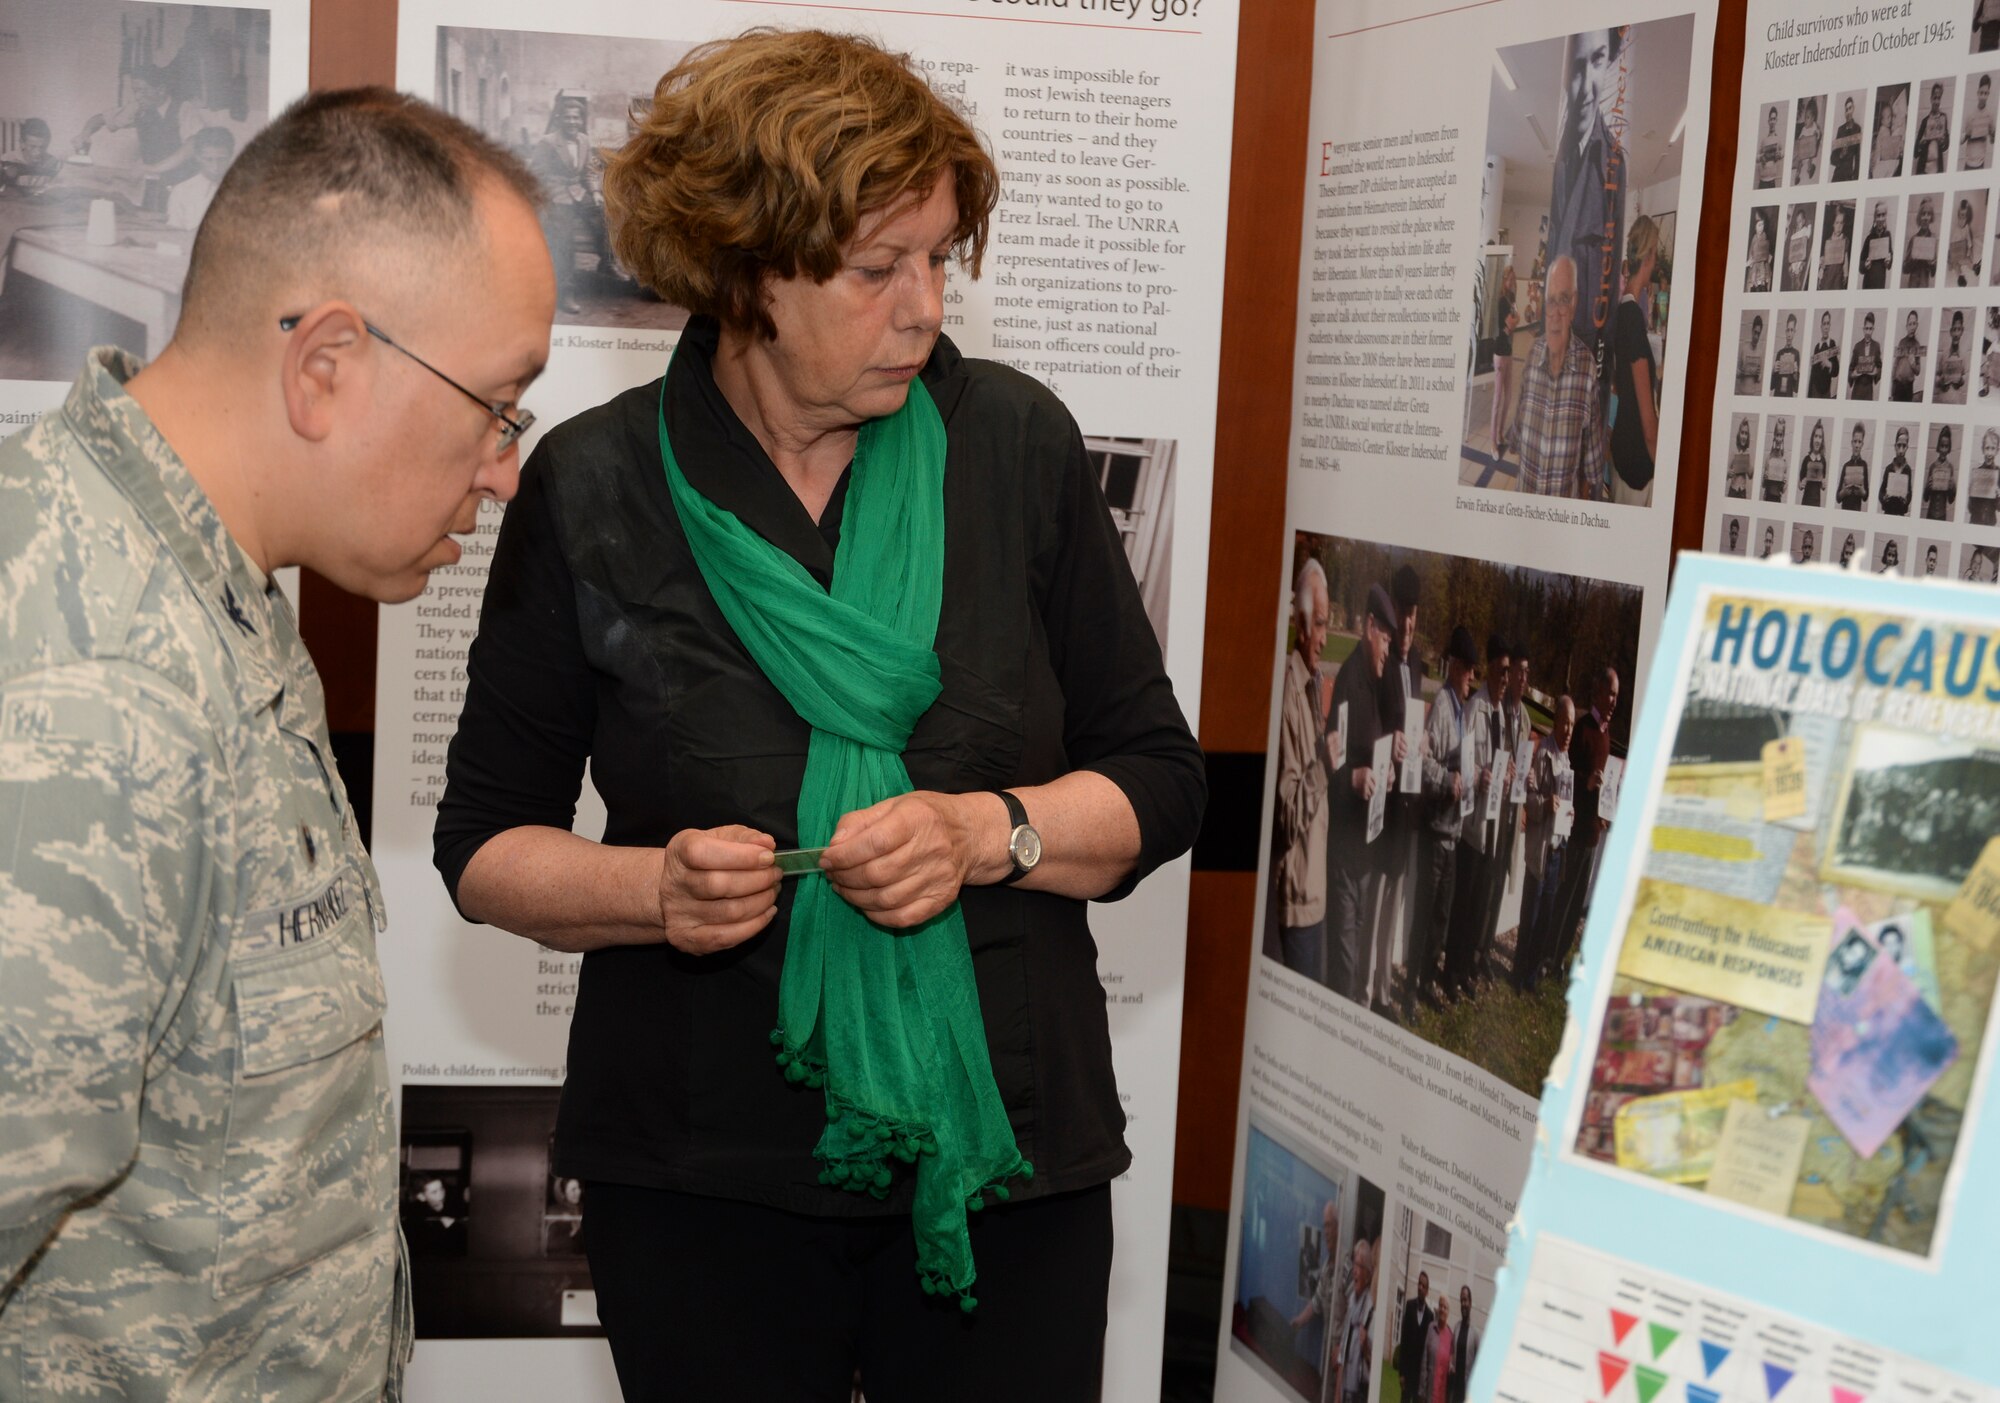 Anna Andlauer, an educator from Markt Indersdorf, Germany, center, speaks about a display on child survivors of the Holocaust to U.S. Air Force Col. Drysdale Hernandez, commander of the 52nd Mission Support Group, as part of the Diversity Day celebration at Club Eifel at Spangdahlem Air Base, Germany, Aug. 25, 2014. The displays and Andlauer’s presentation documented the care given to displaced Jewish and Gentile children following the Holocaust. (U.S. Air Force photo by Staff Sgt. Joe W. McFadden/Released)